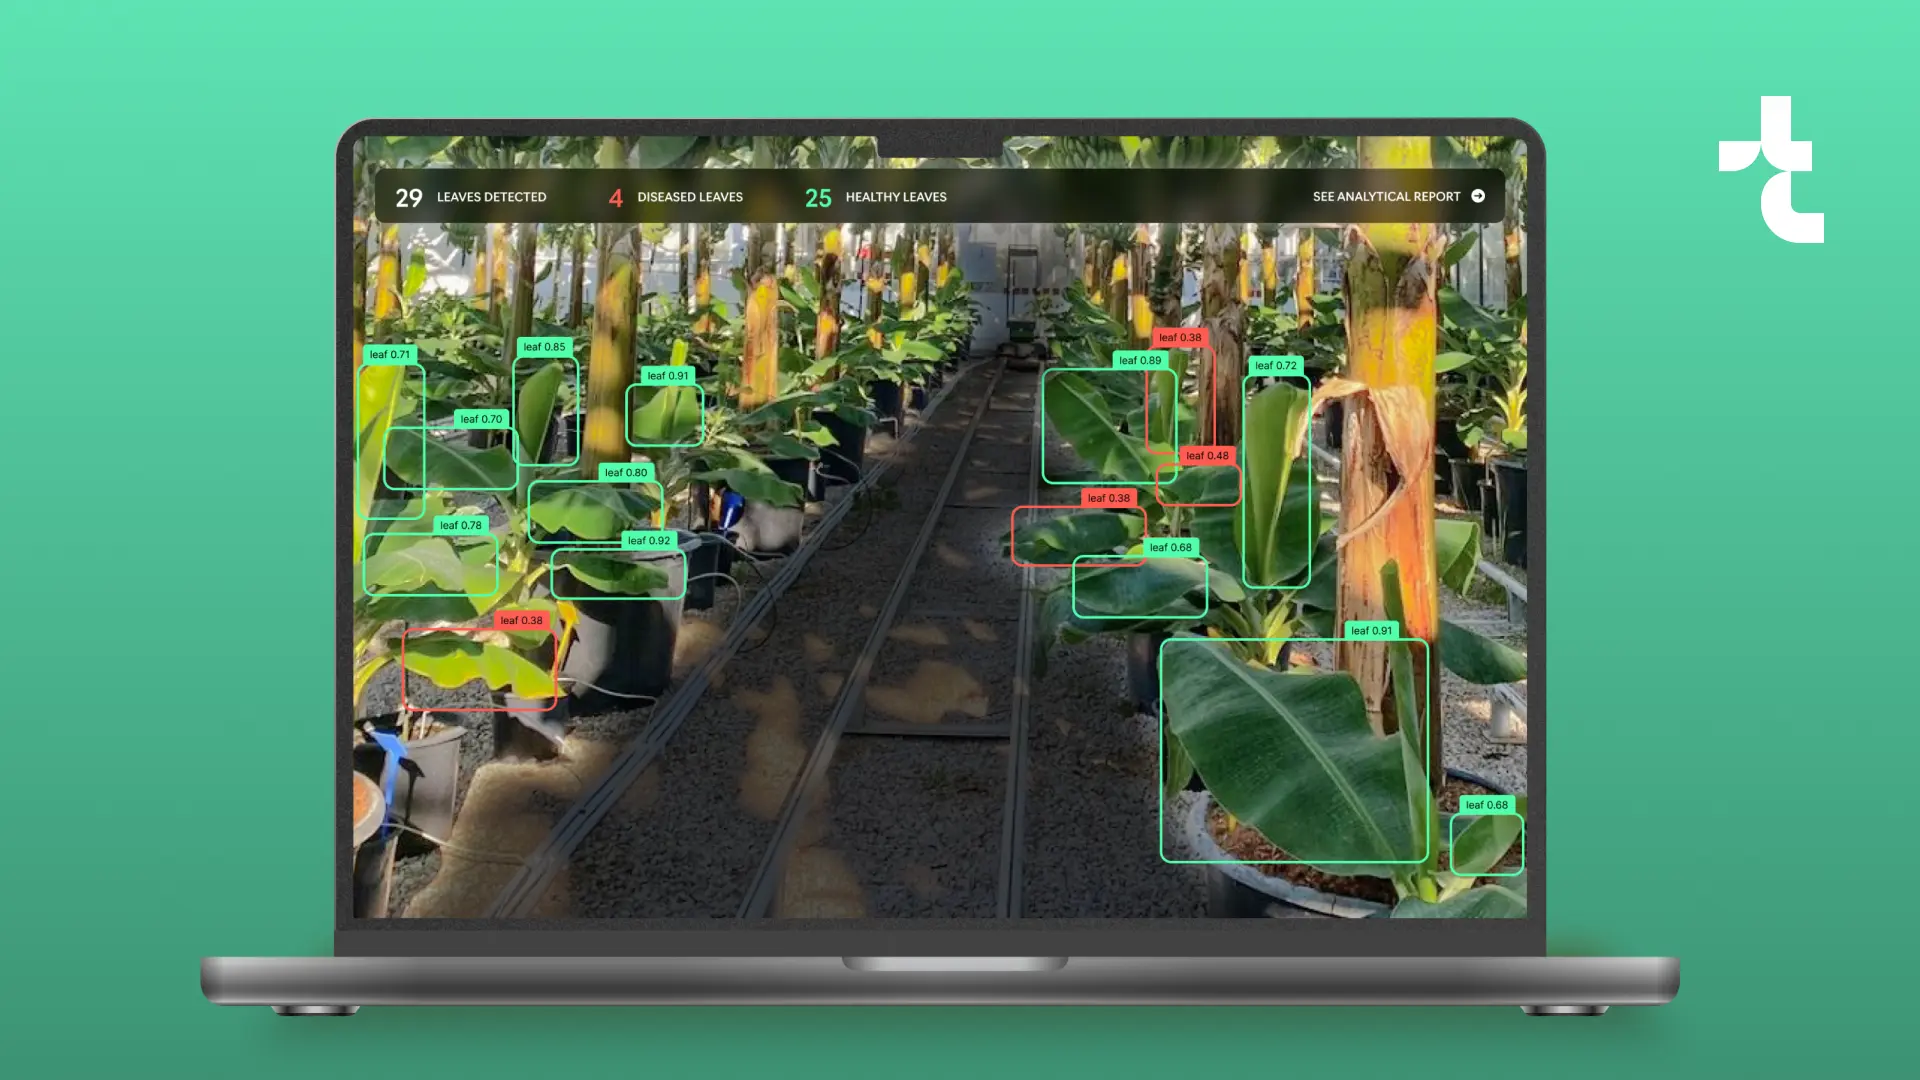 How to Use Computer Vision in Agriculture for Detecting Diseased Banana Leaves